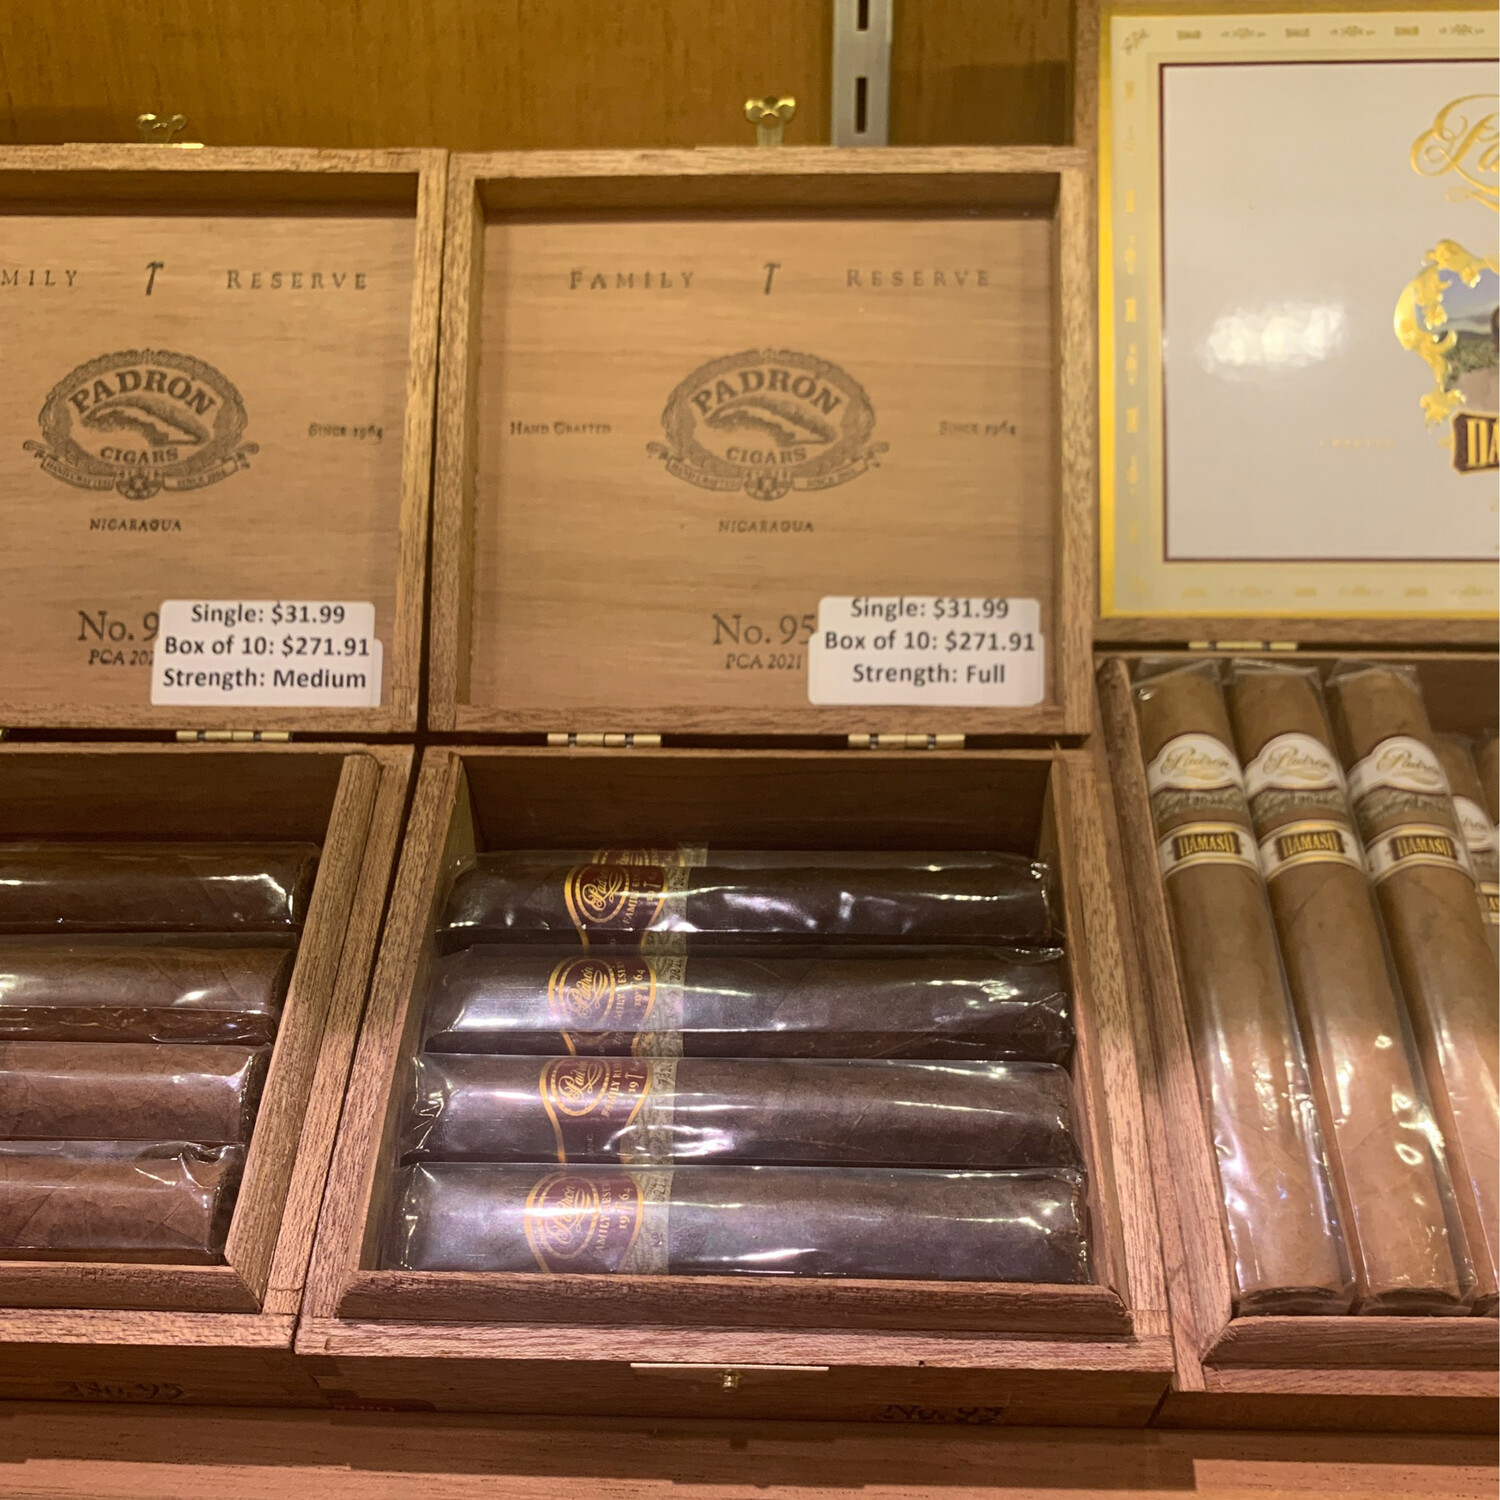 Padron Family Reserve No. 95 Mad.